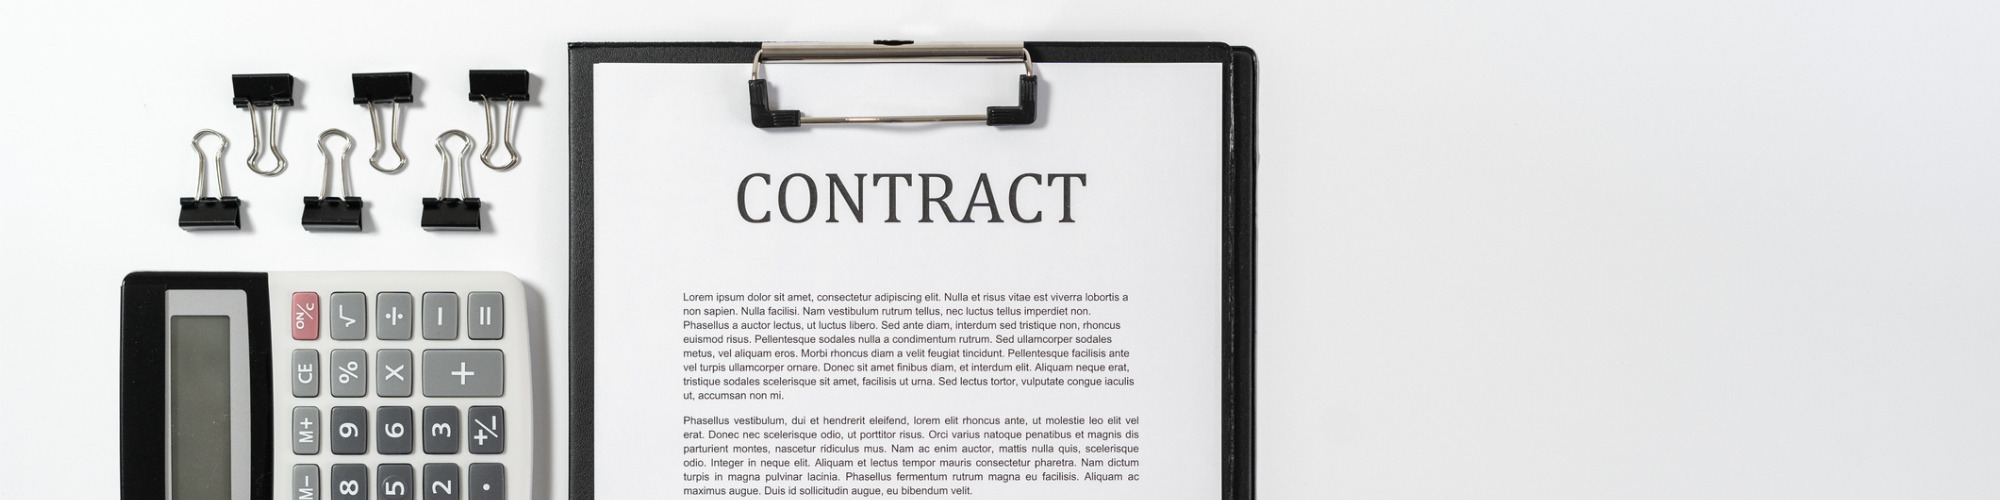 Contract Law for Business - An ABC Guide